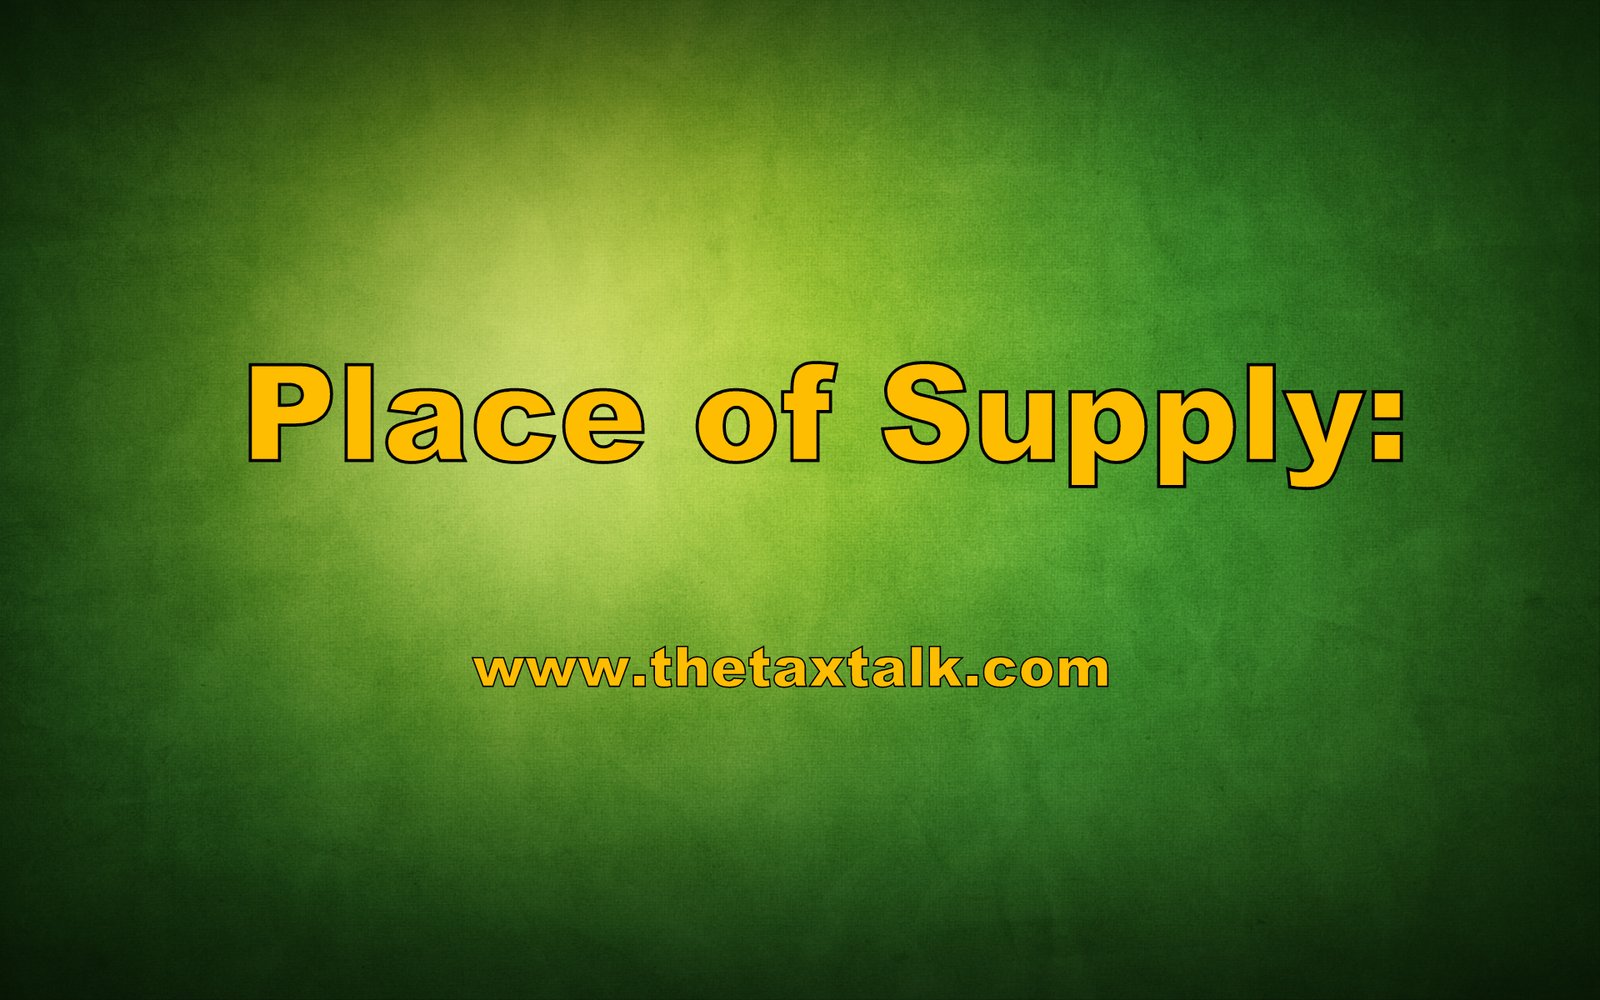 Place of Supply: